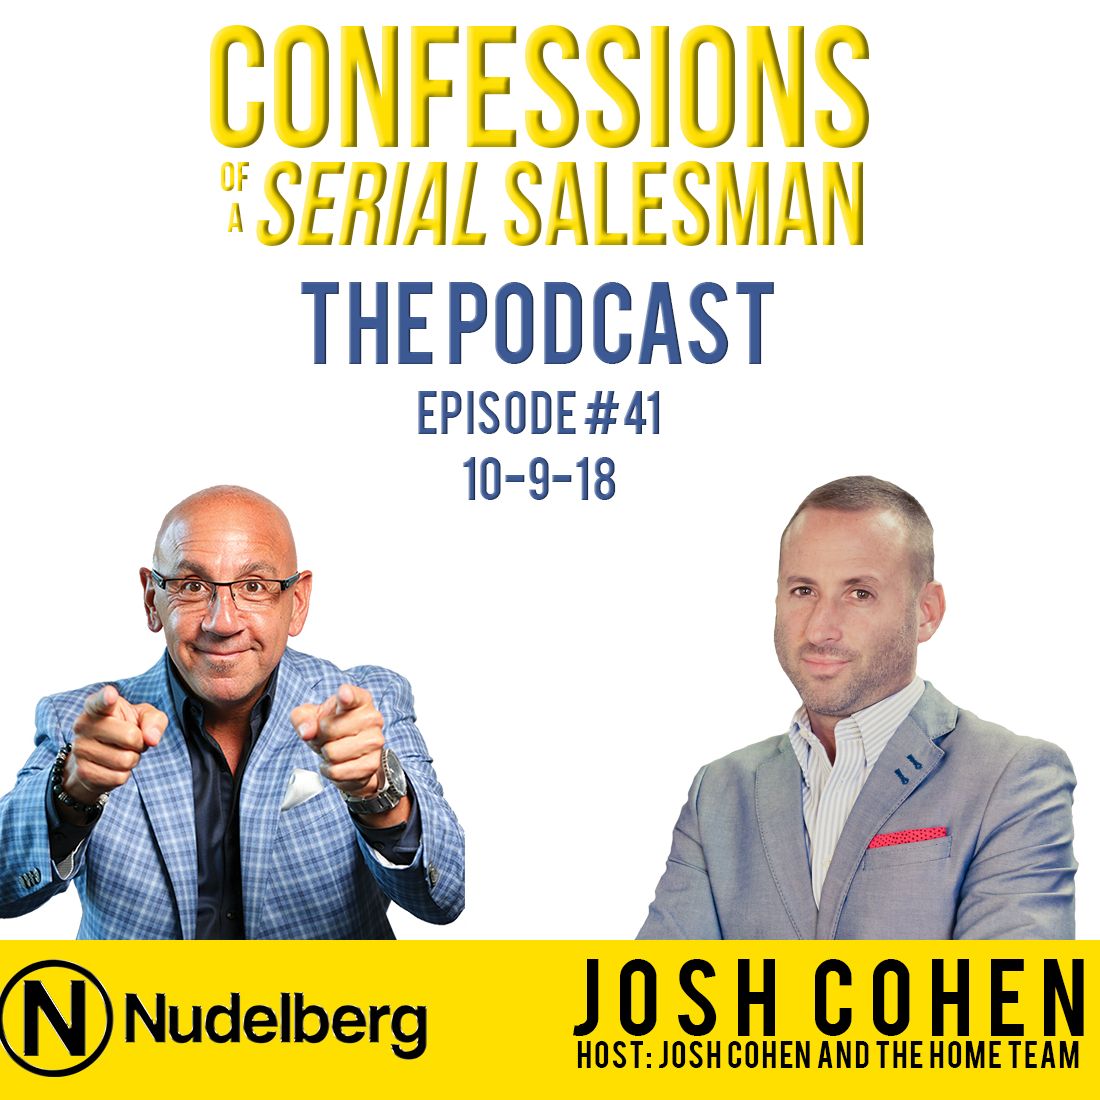 Confessions of a Serial Salesman The Podcast with Steve Nudelberg